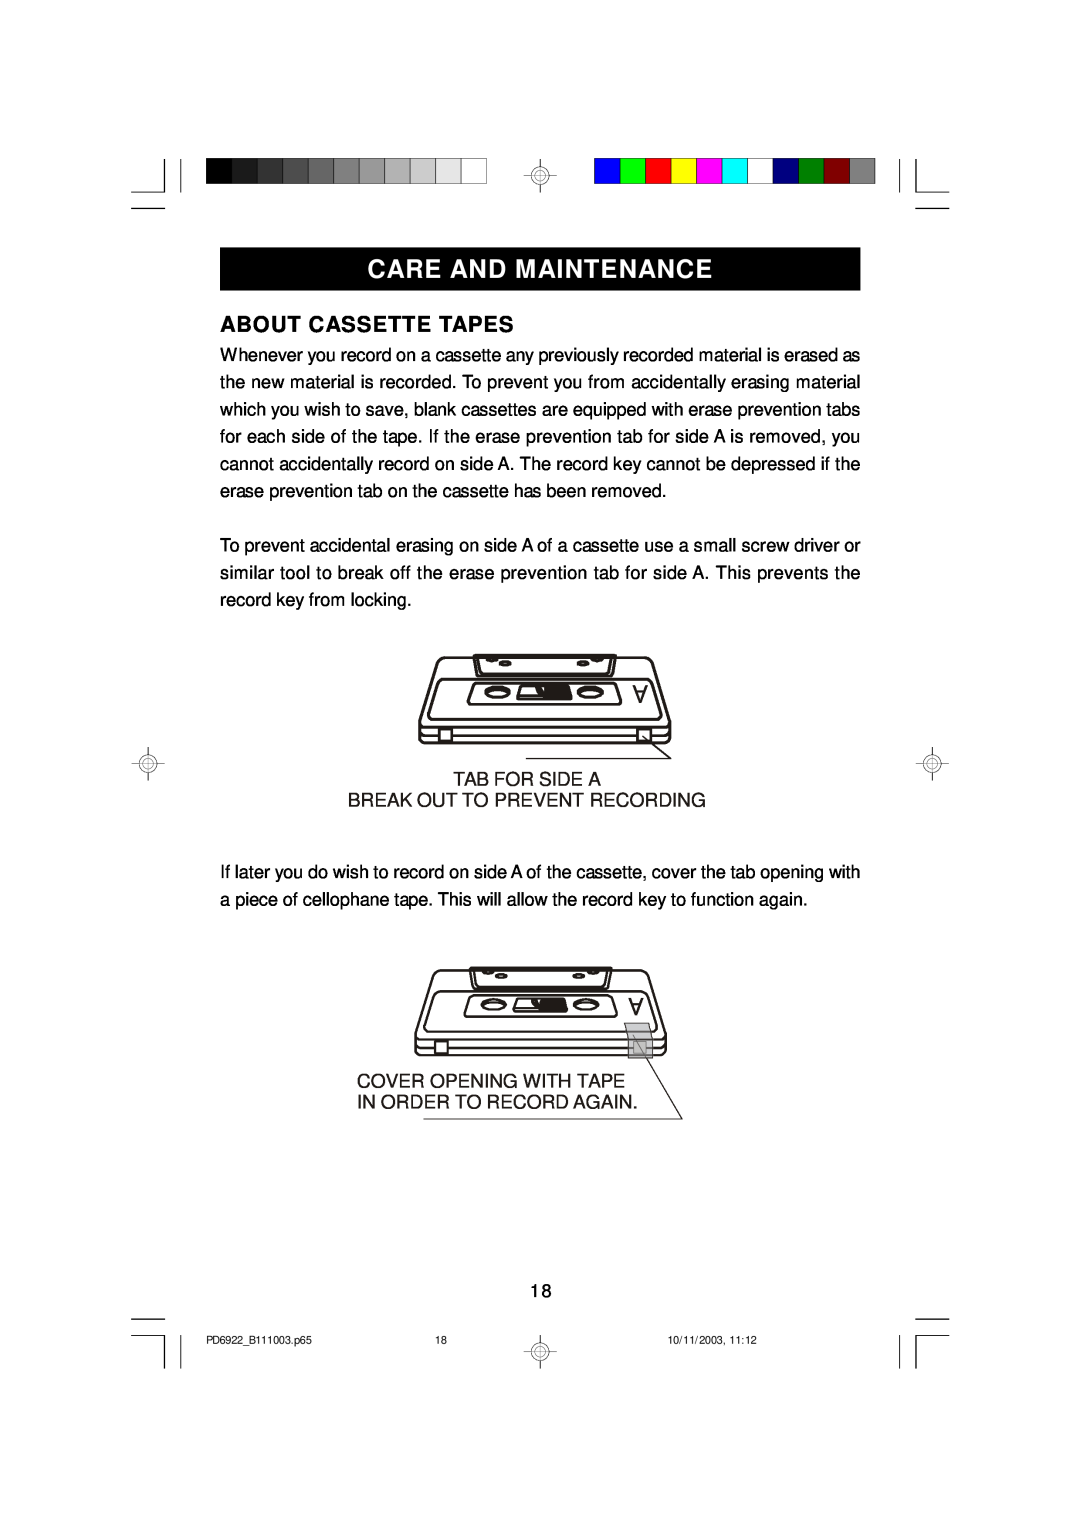 Emerson PD6922 owner manual Care And Maintenance, About Cassette Tapes, Tab For Side A Break Out To Prevent Recording 